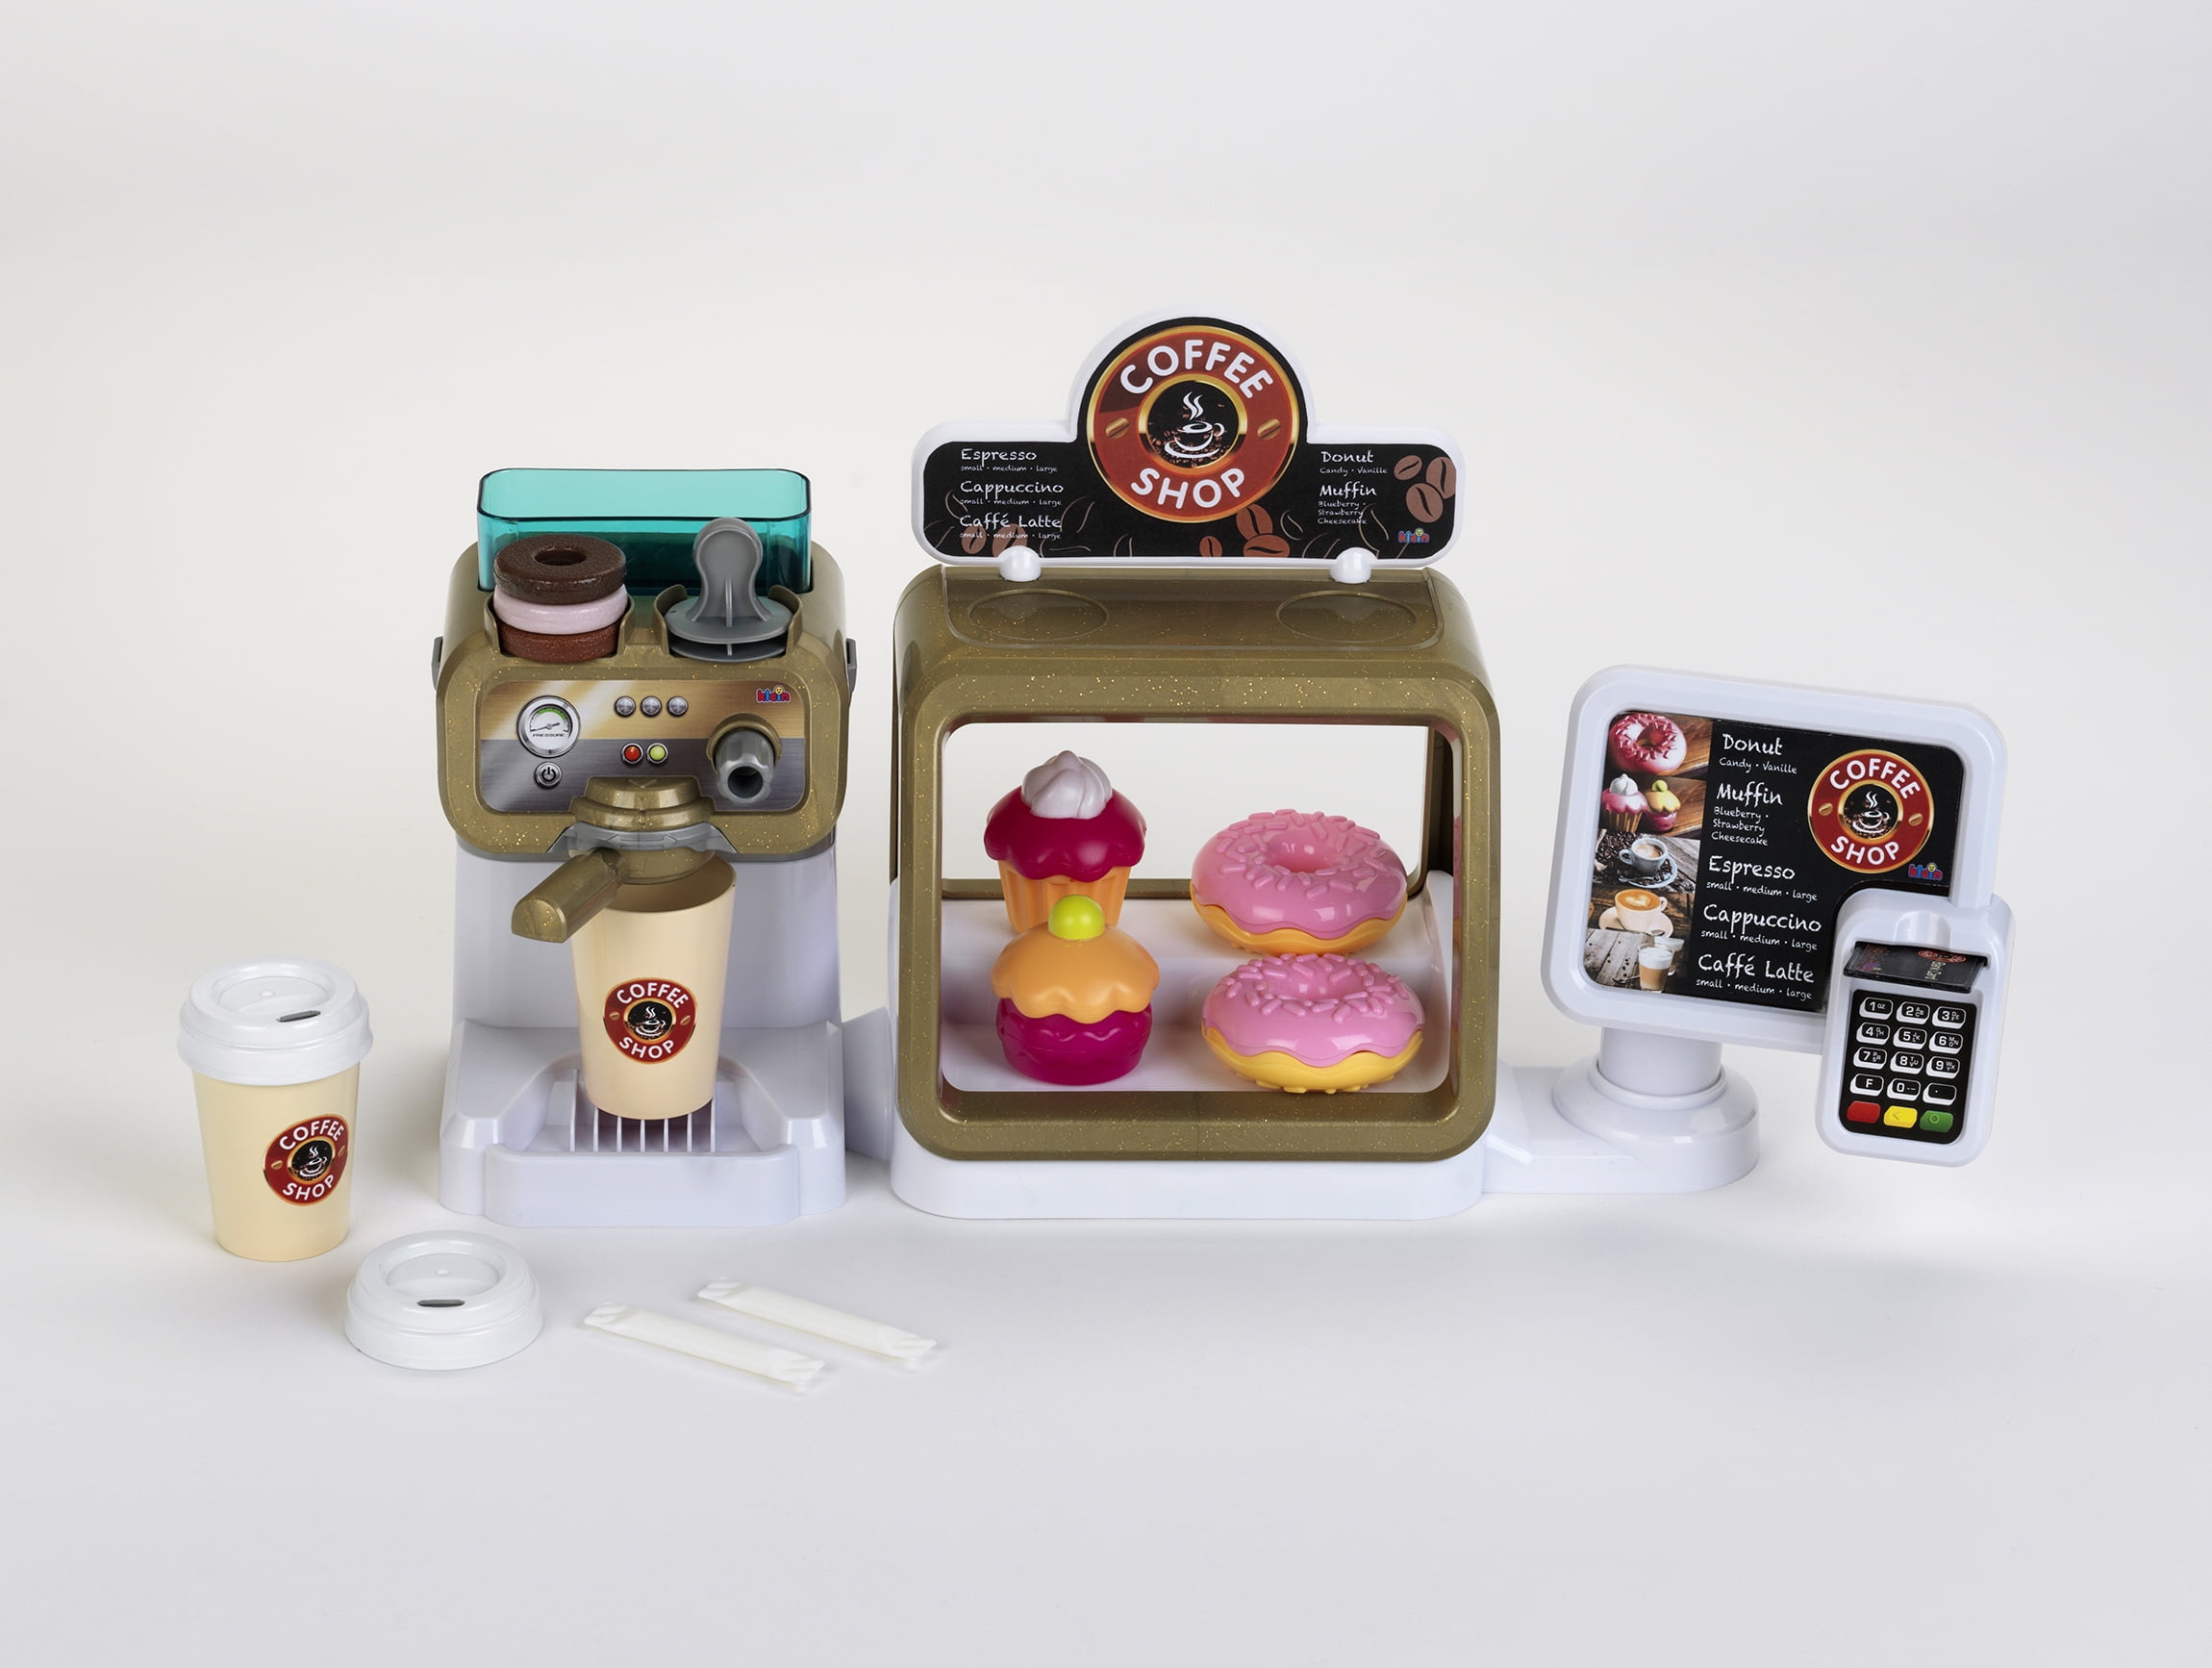 Playset Theo Klein Coffee and Pastry Shop